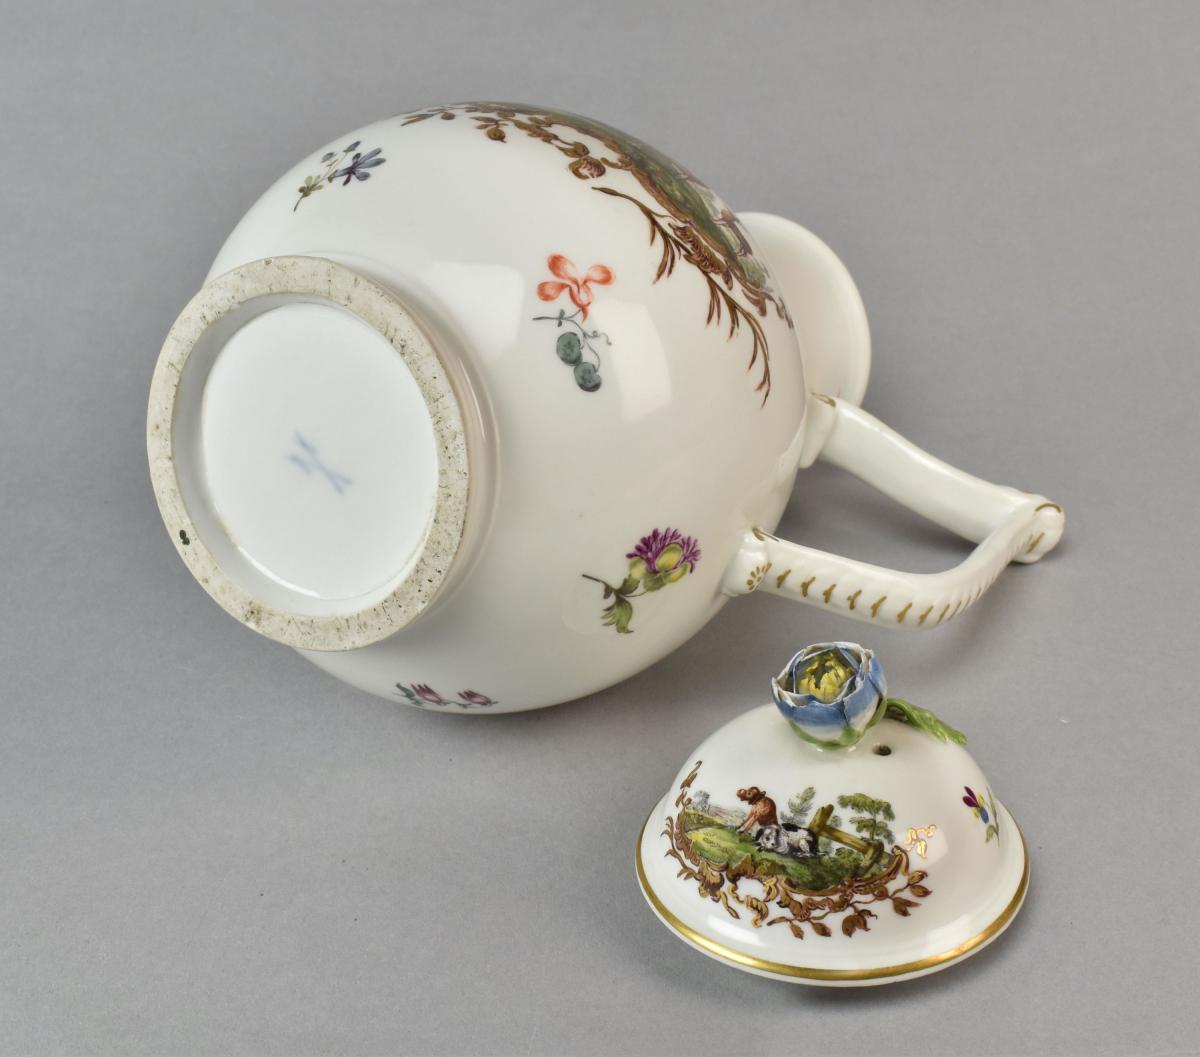 Meissen porcelain coffee pot decorated with hunting scenes, c.1750